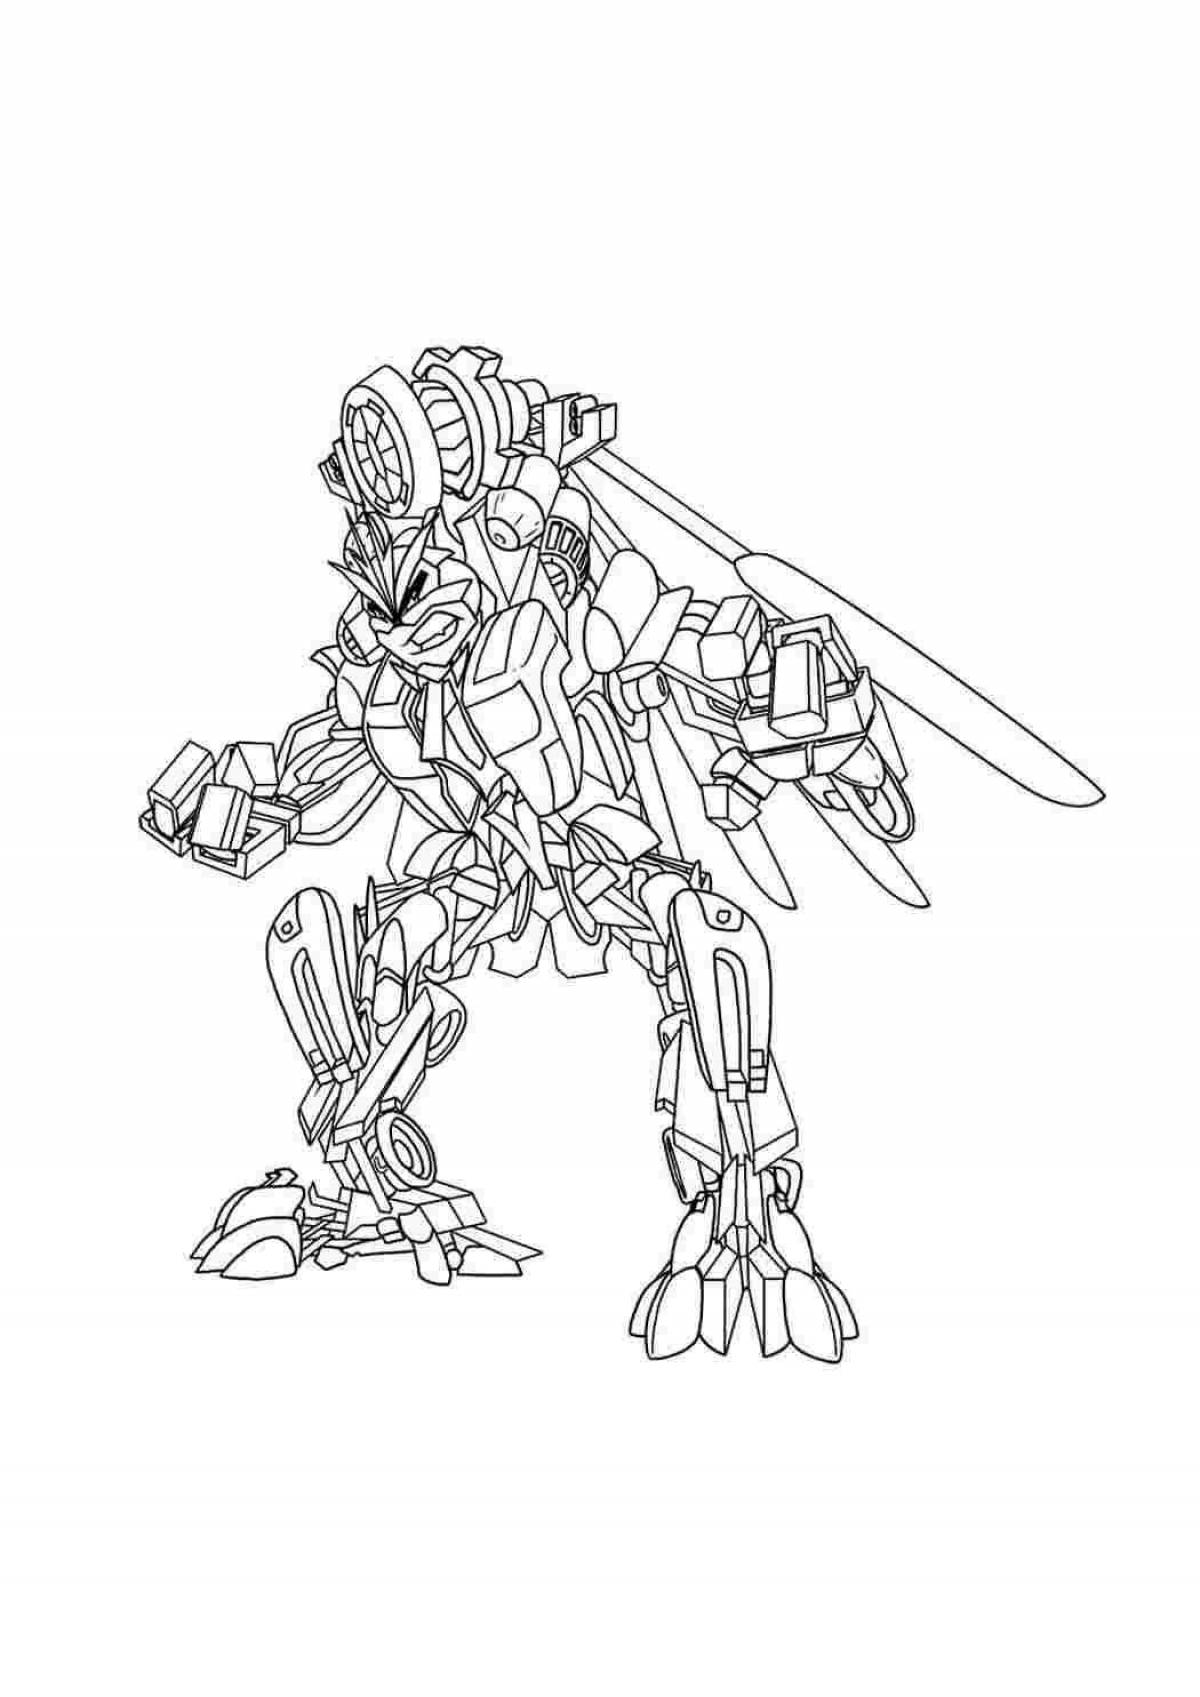 Coloring page wonderful robot with siren head